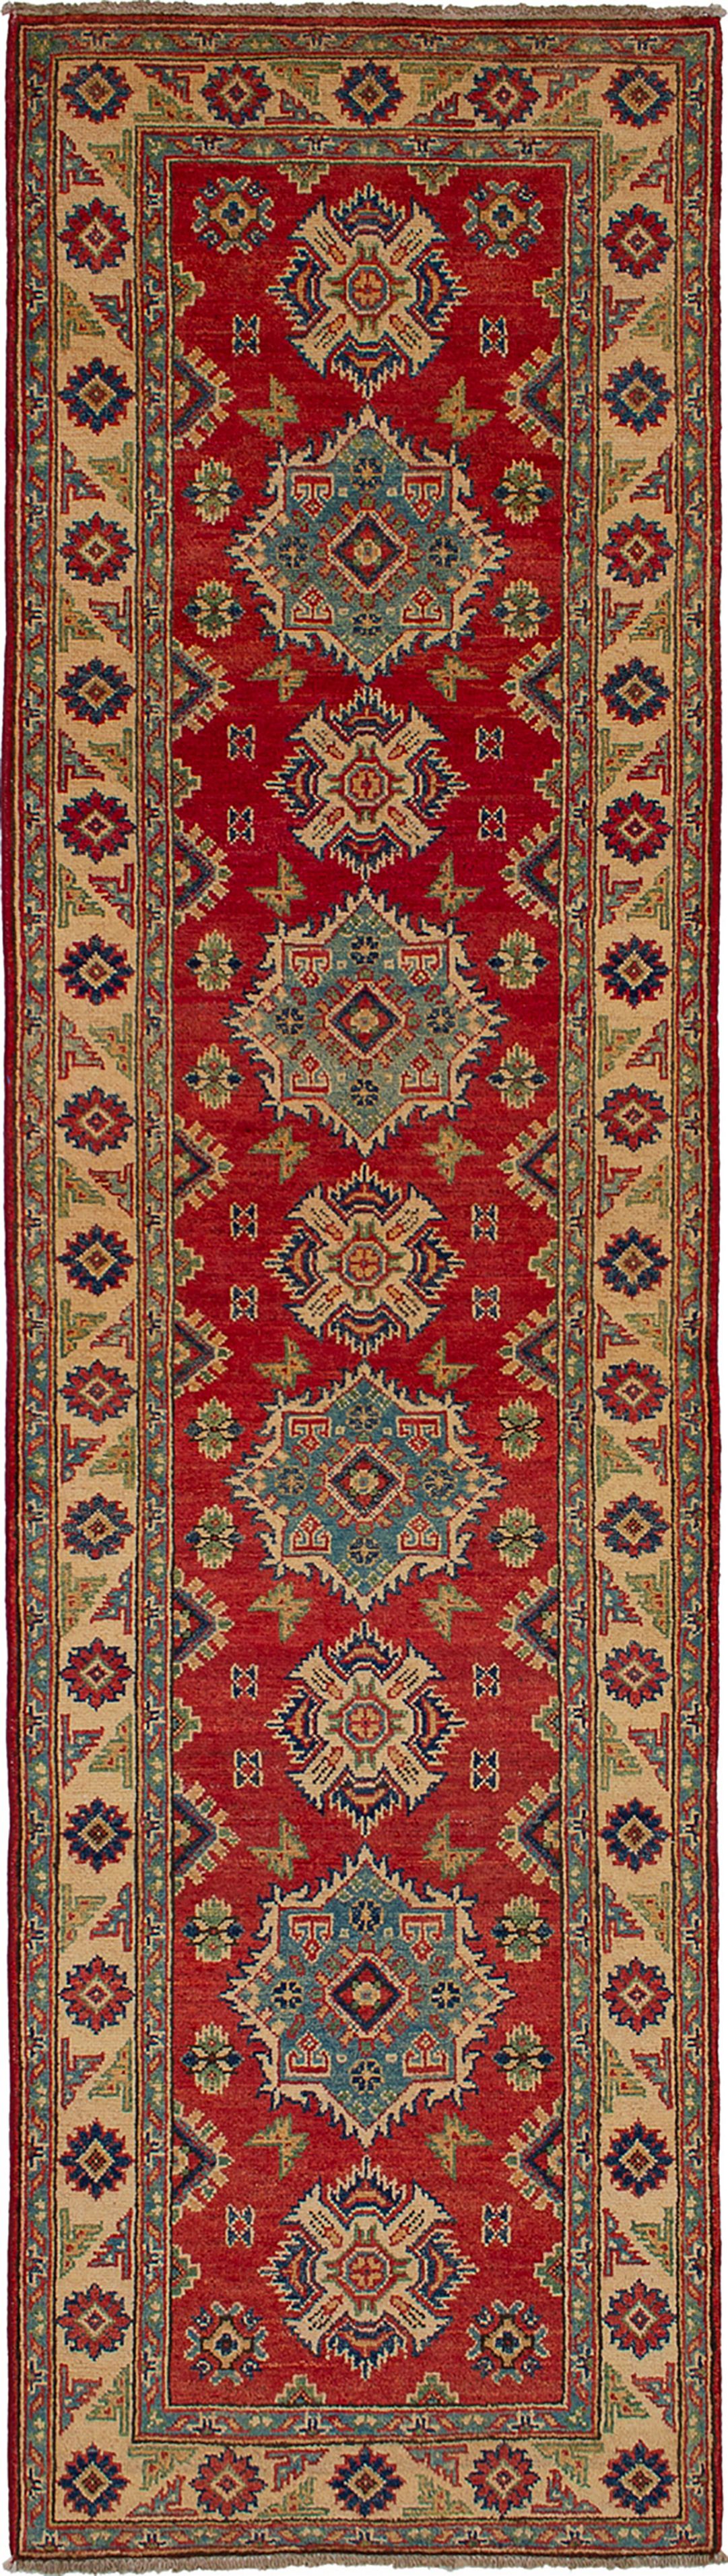 Hand-knotted Finest Gazni Red Wool Rug 2'7" x 9'7"  Size: 2'7" x 9'7"  